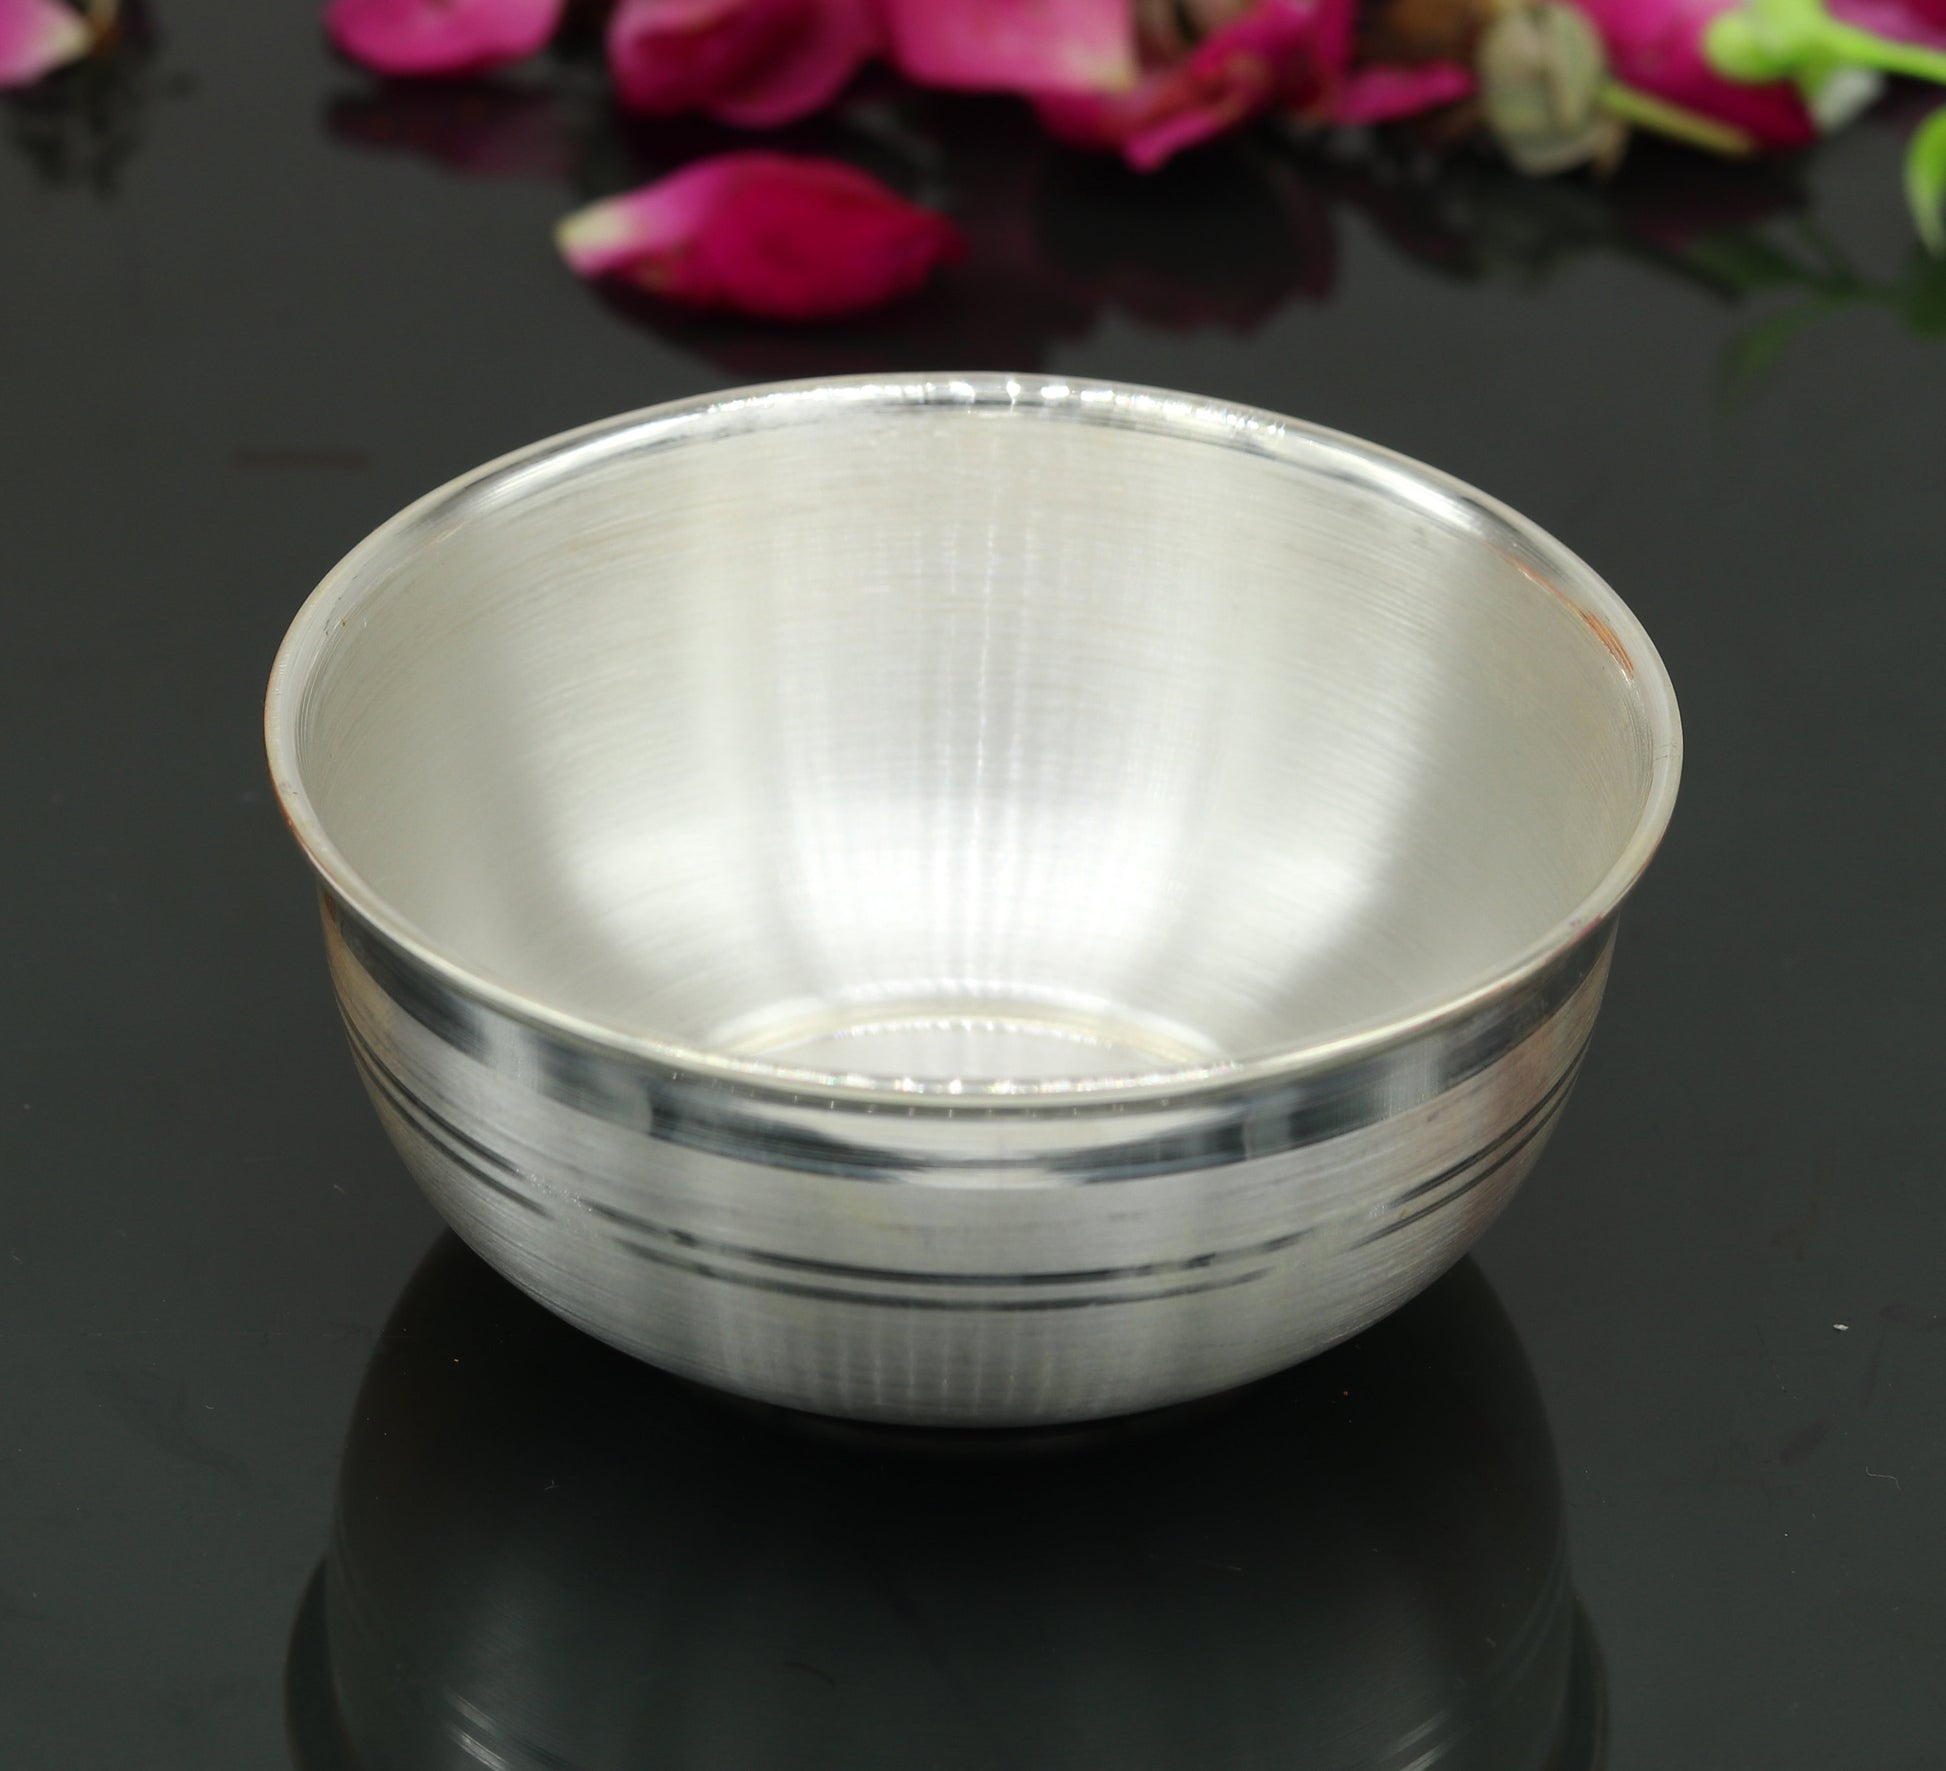 999 pure sterling silver handmade solid silver bowl kitchen utensils, vessels, silver has antibacterial properties, keep stay healthy sv53 - TRIBAL ORNAMENTS